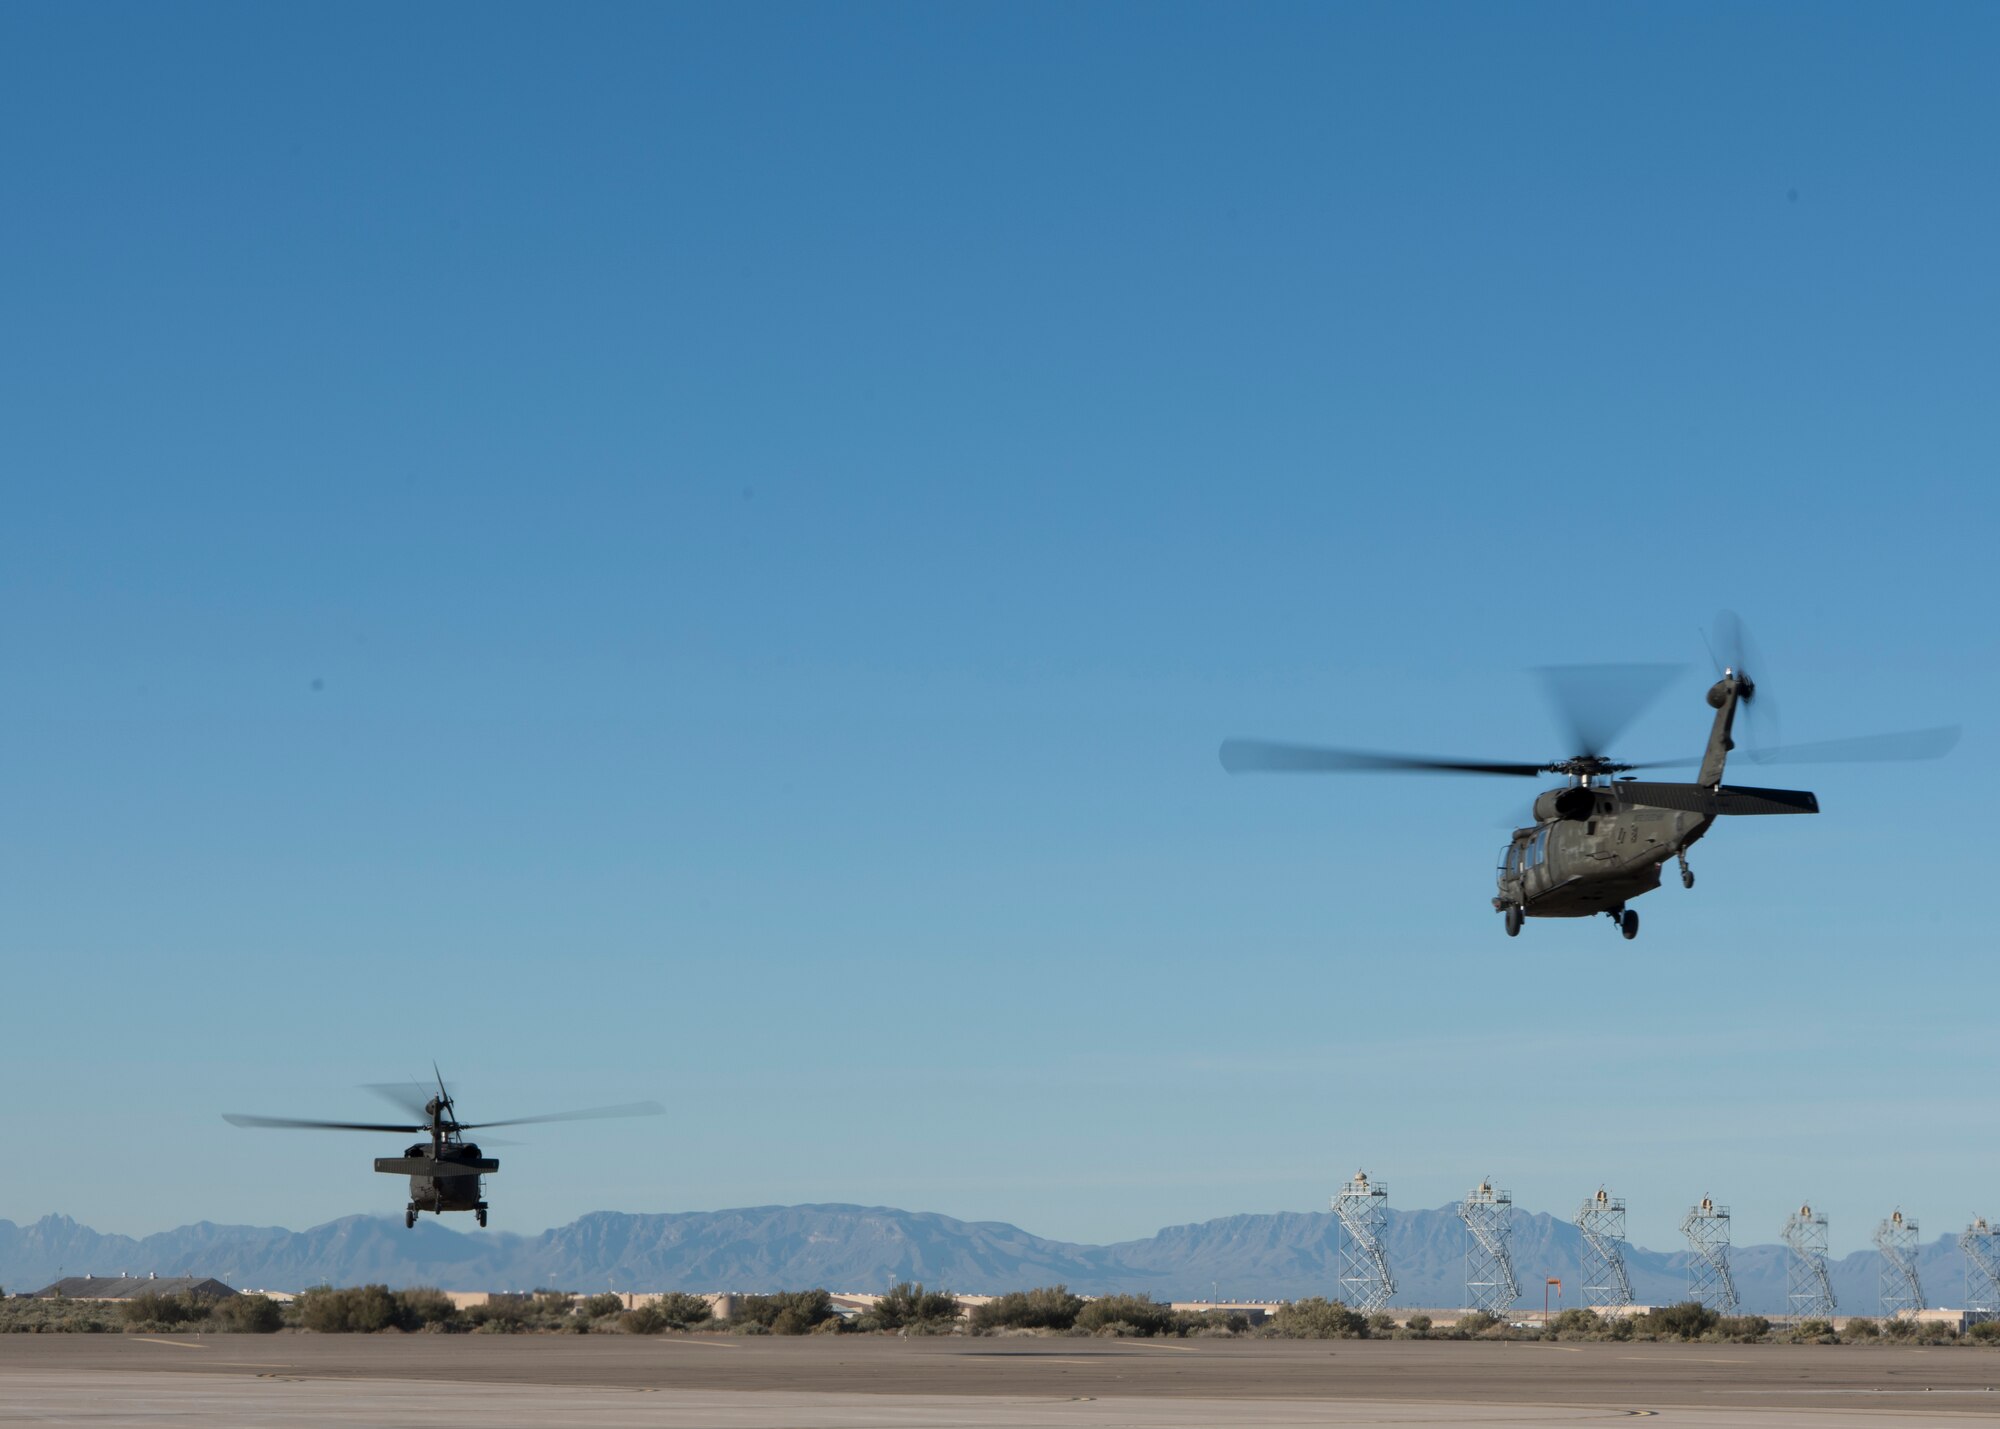 Two UH-60 Black Hawk helicopters take off of Holloman Air Force Base, N.M., November 14, 2018. Gen. Paul Selva, vice chairman of the Joint Chiefs of Staff, visited Holloman November 13 to 14, and received a helicopter tour of White Sands Missile Range, N.M. (U.S. Air Force photo by Staff Sgt. BreeAnn Sachs).